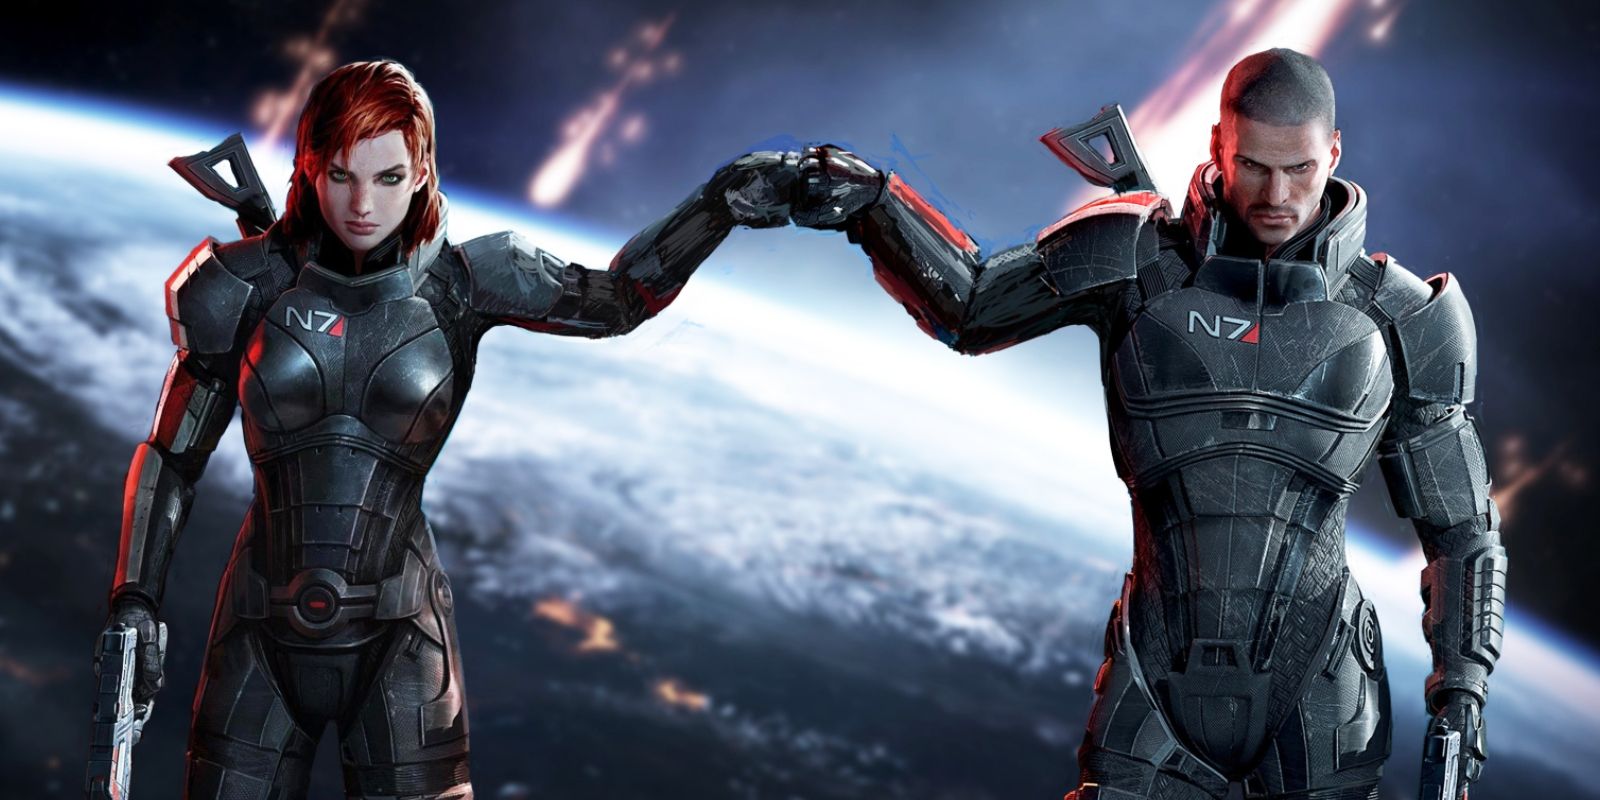 Mass Effect 2 Cast Who Plays Who On Shepard's Crew Commander Voice Actor Male Female